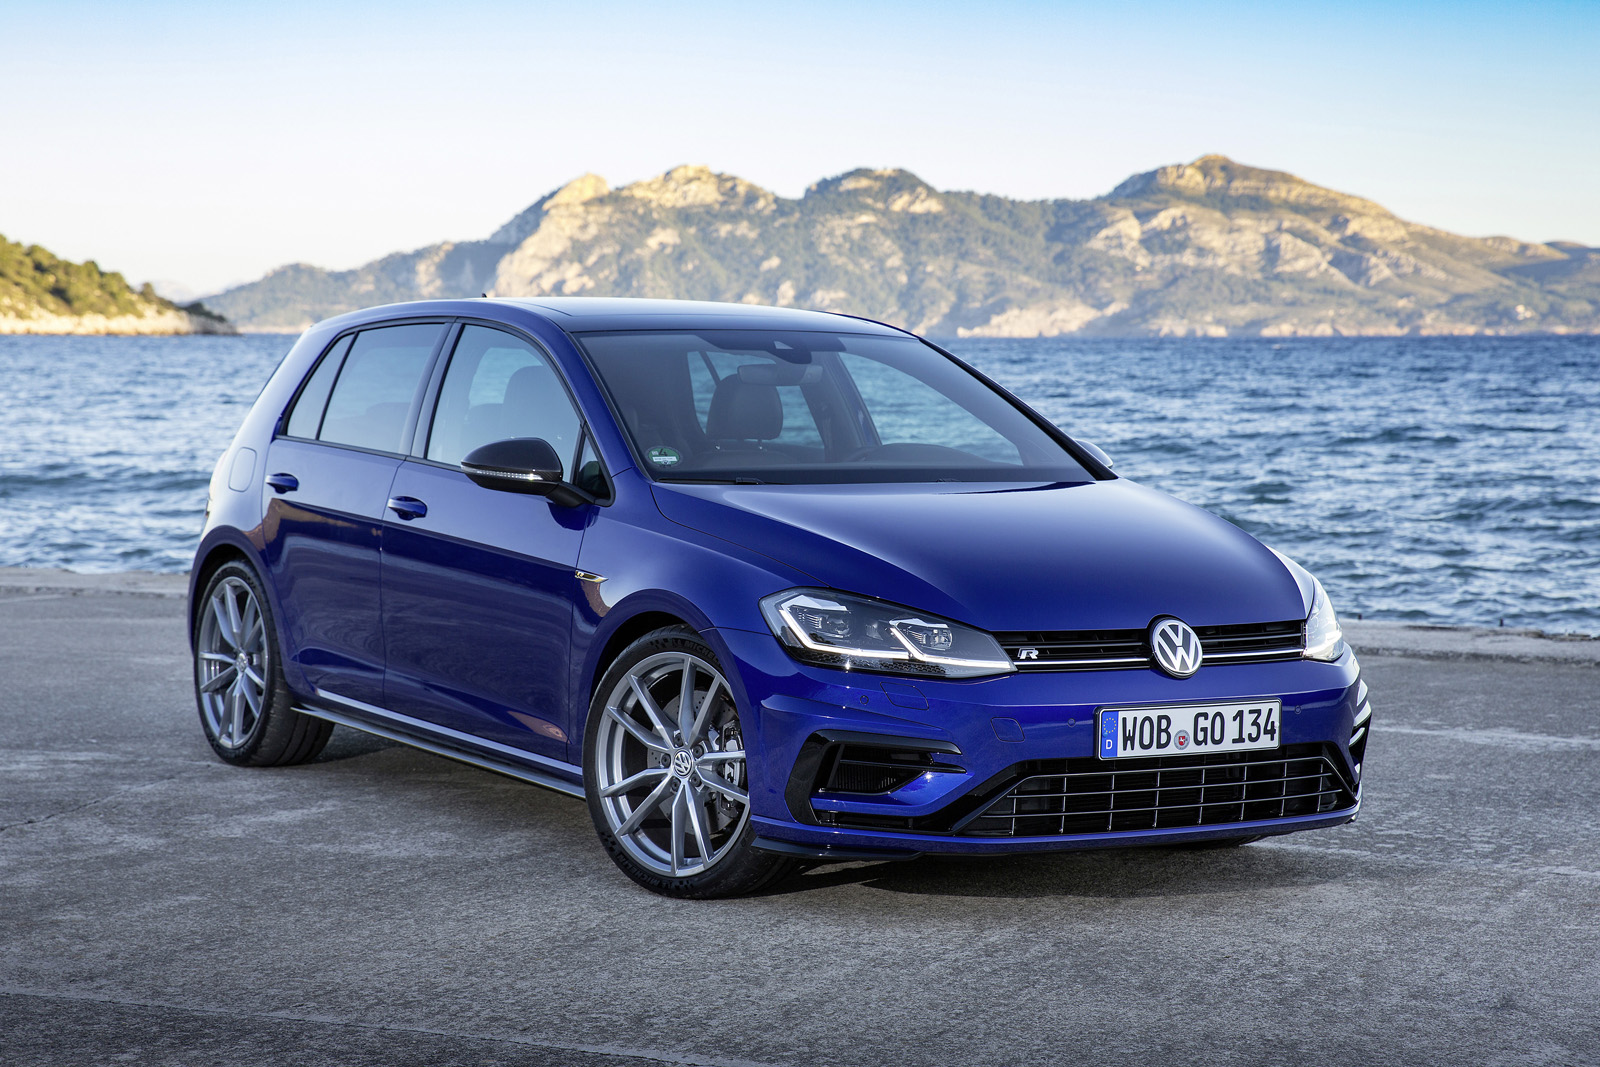 VW Golf R Even More Tempting With New Brakes, Titanium